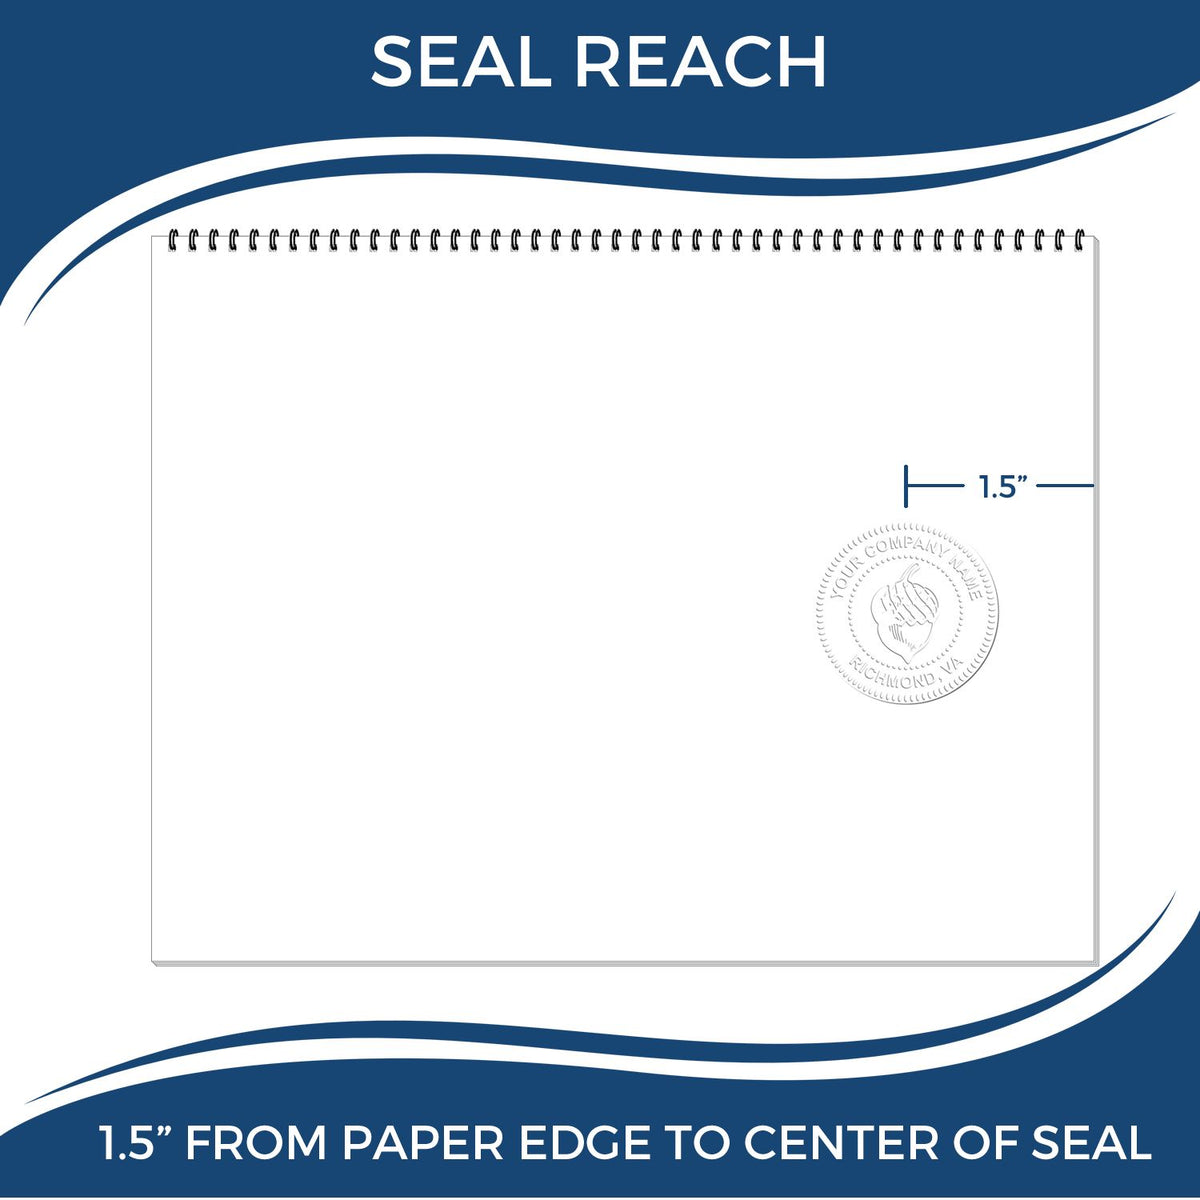 An infographic showing the seal reach which is represented by a ruler and a miniature seal image of the Hybrid South Dakota Engineer Seal